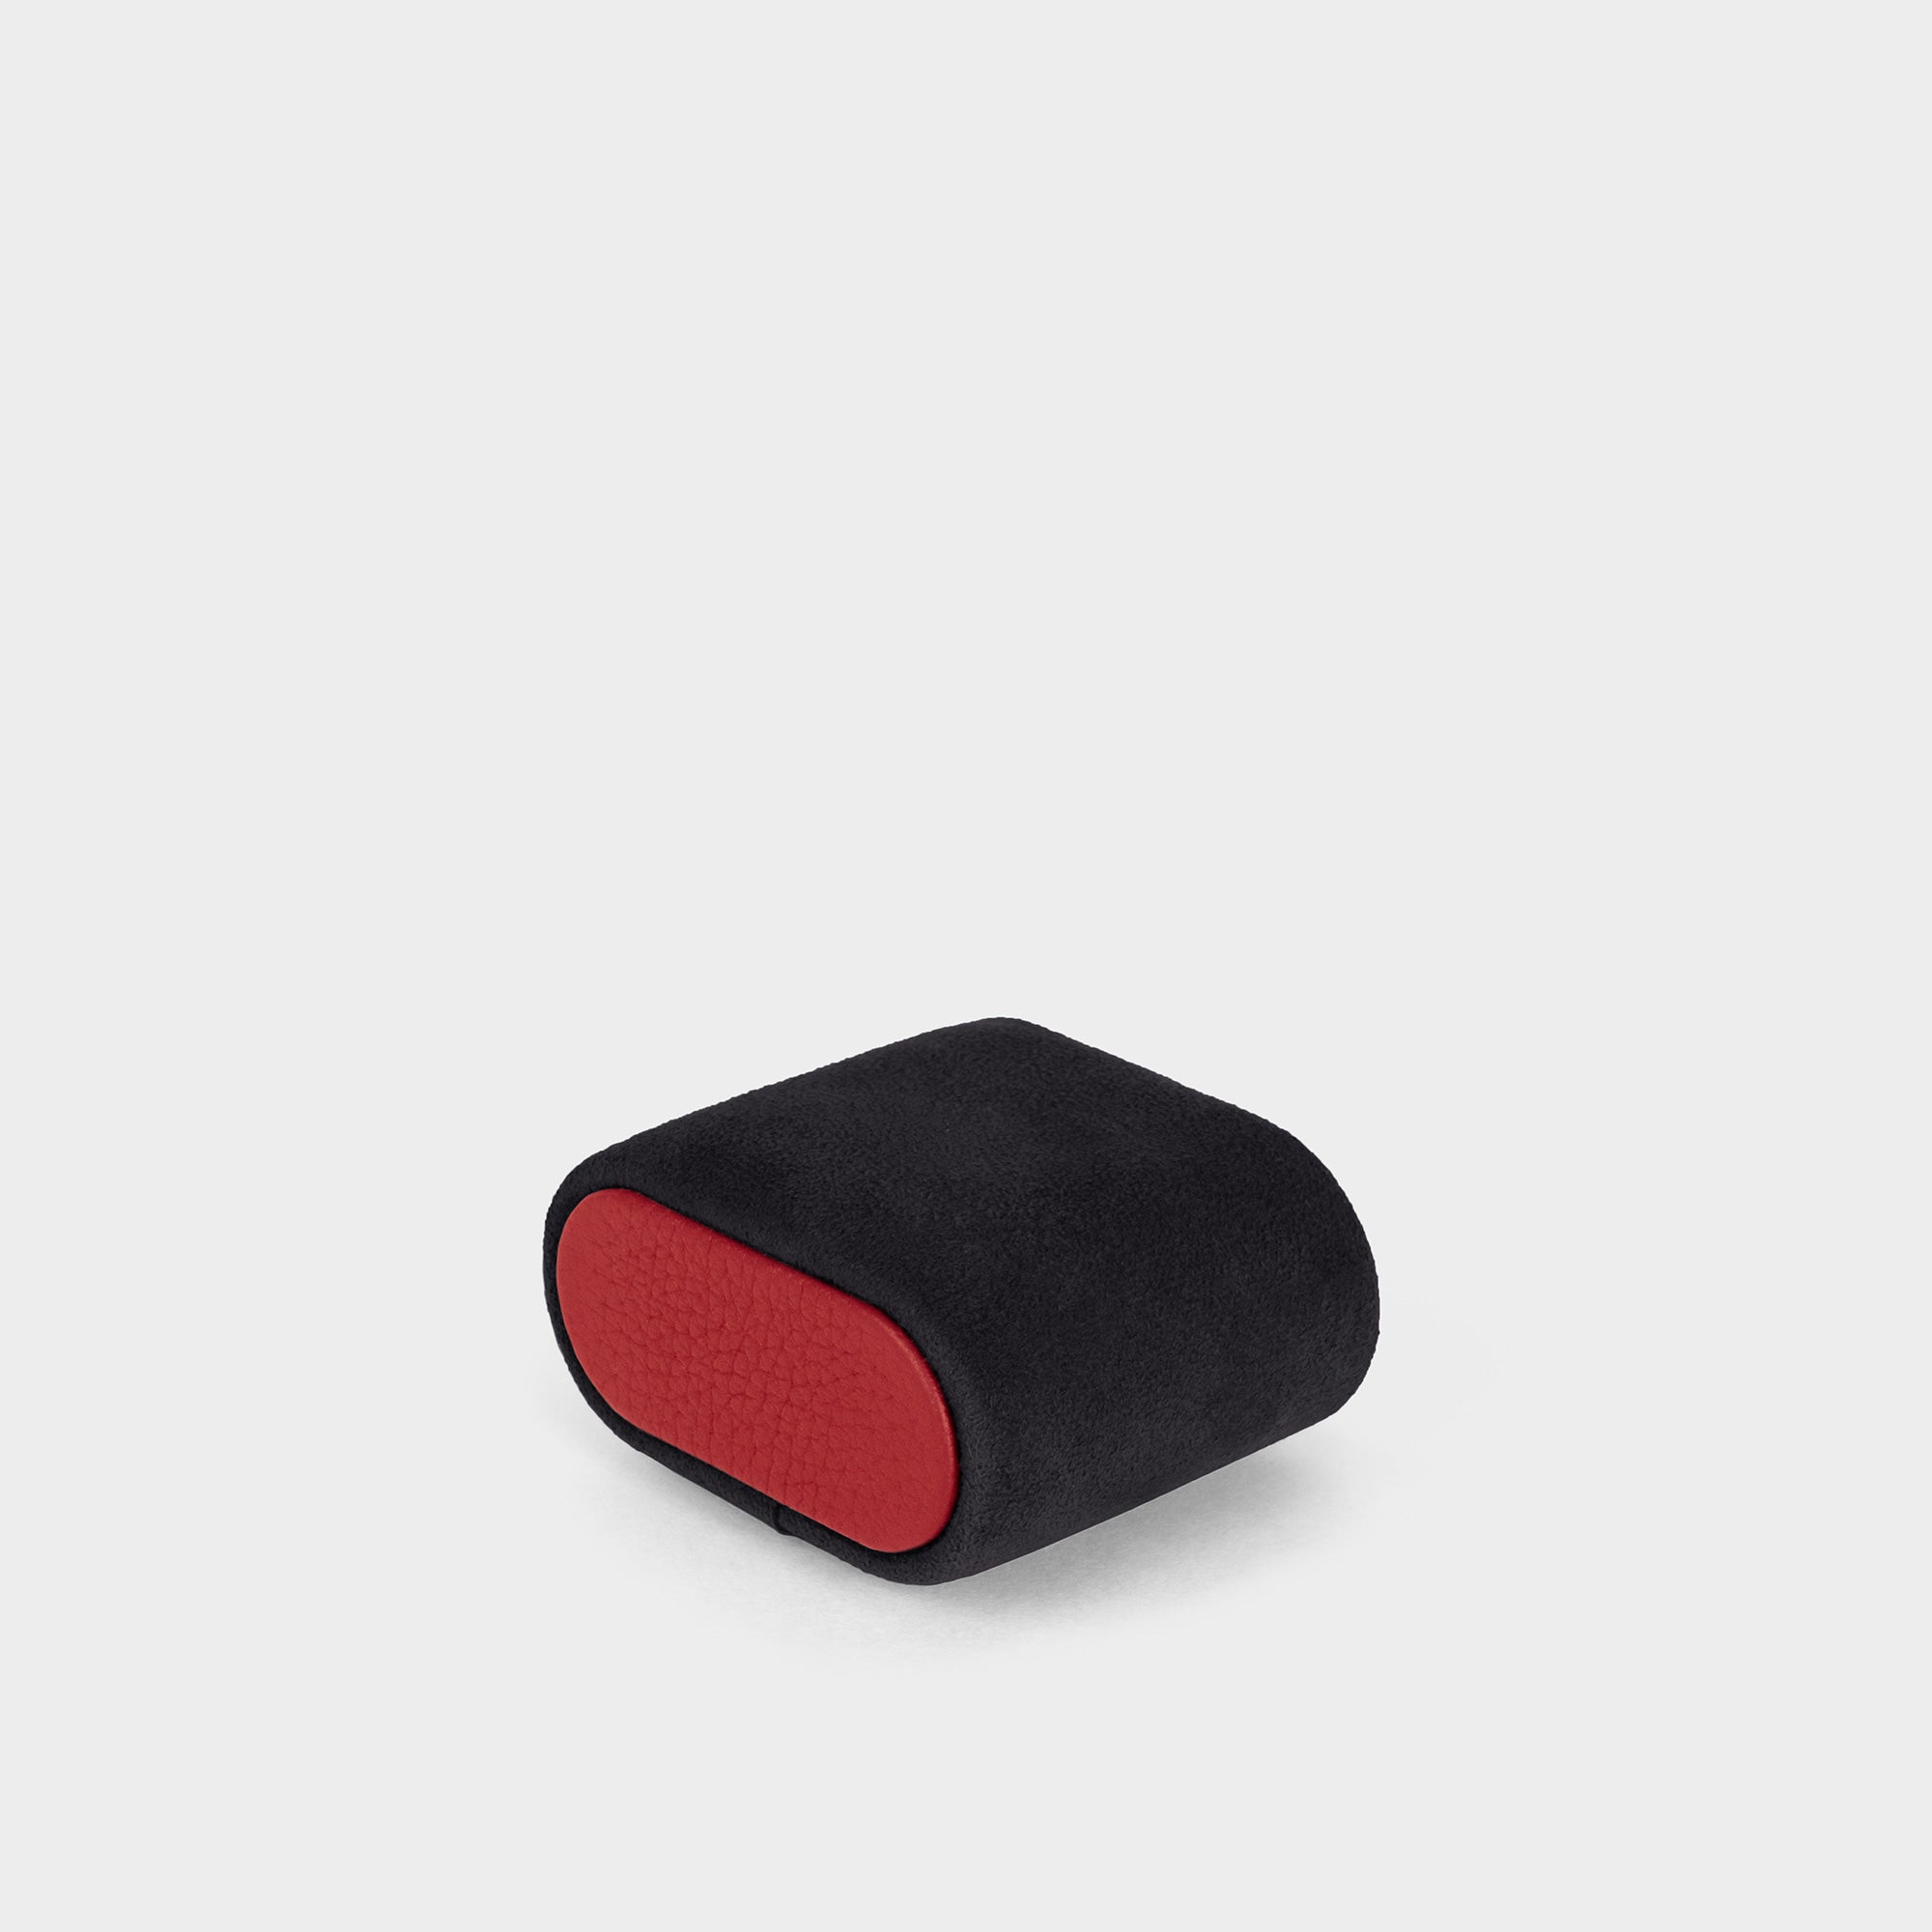 Soft Alcantara cushion with contrasting red leather accents